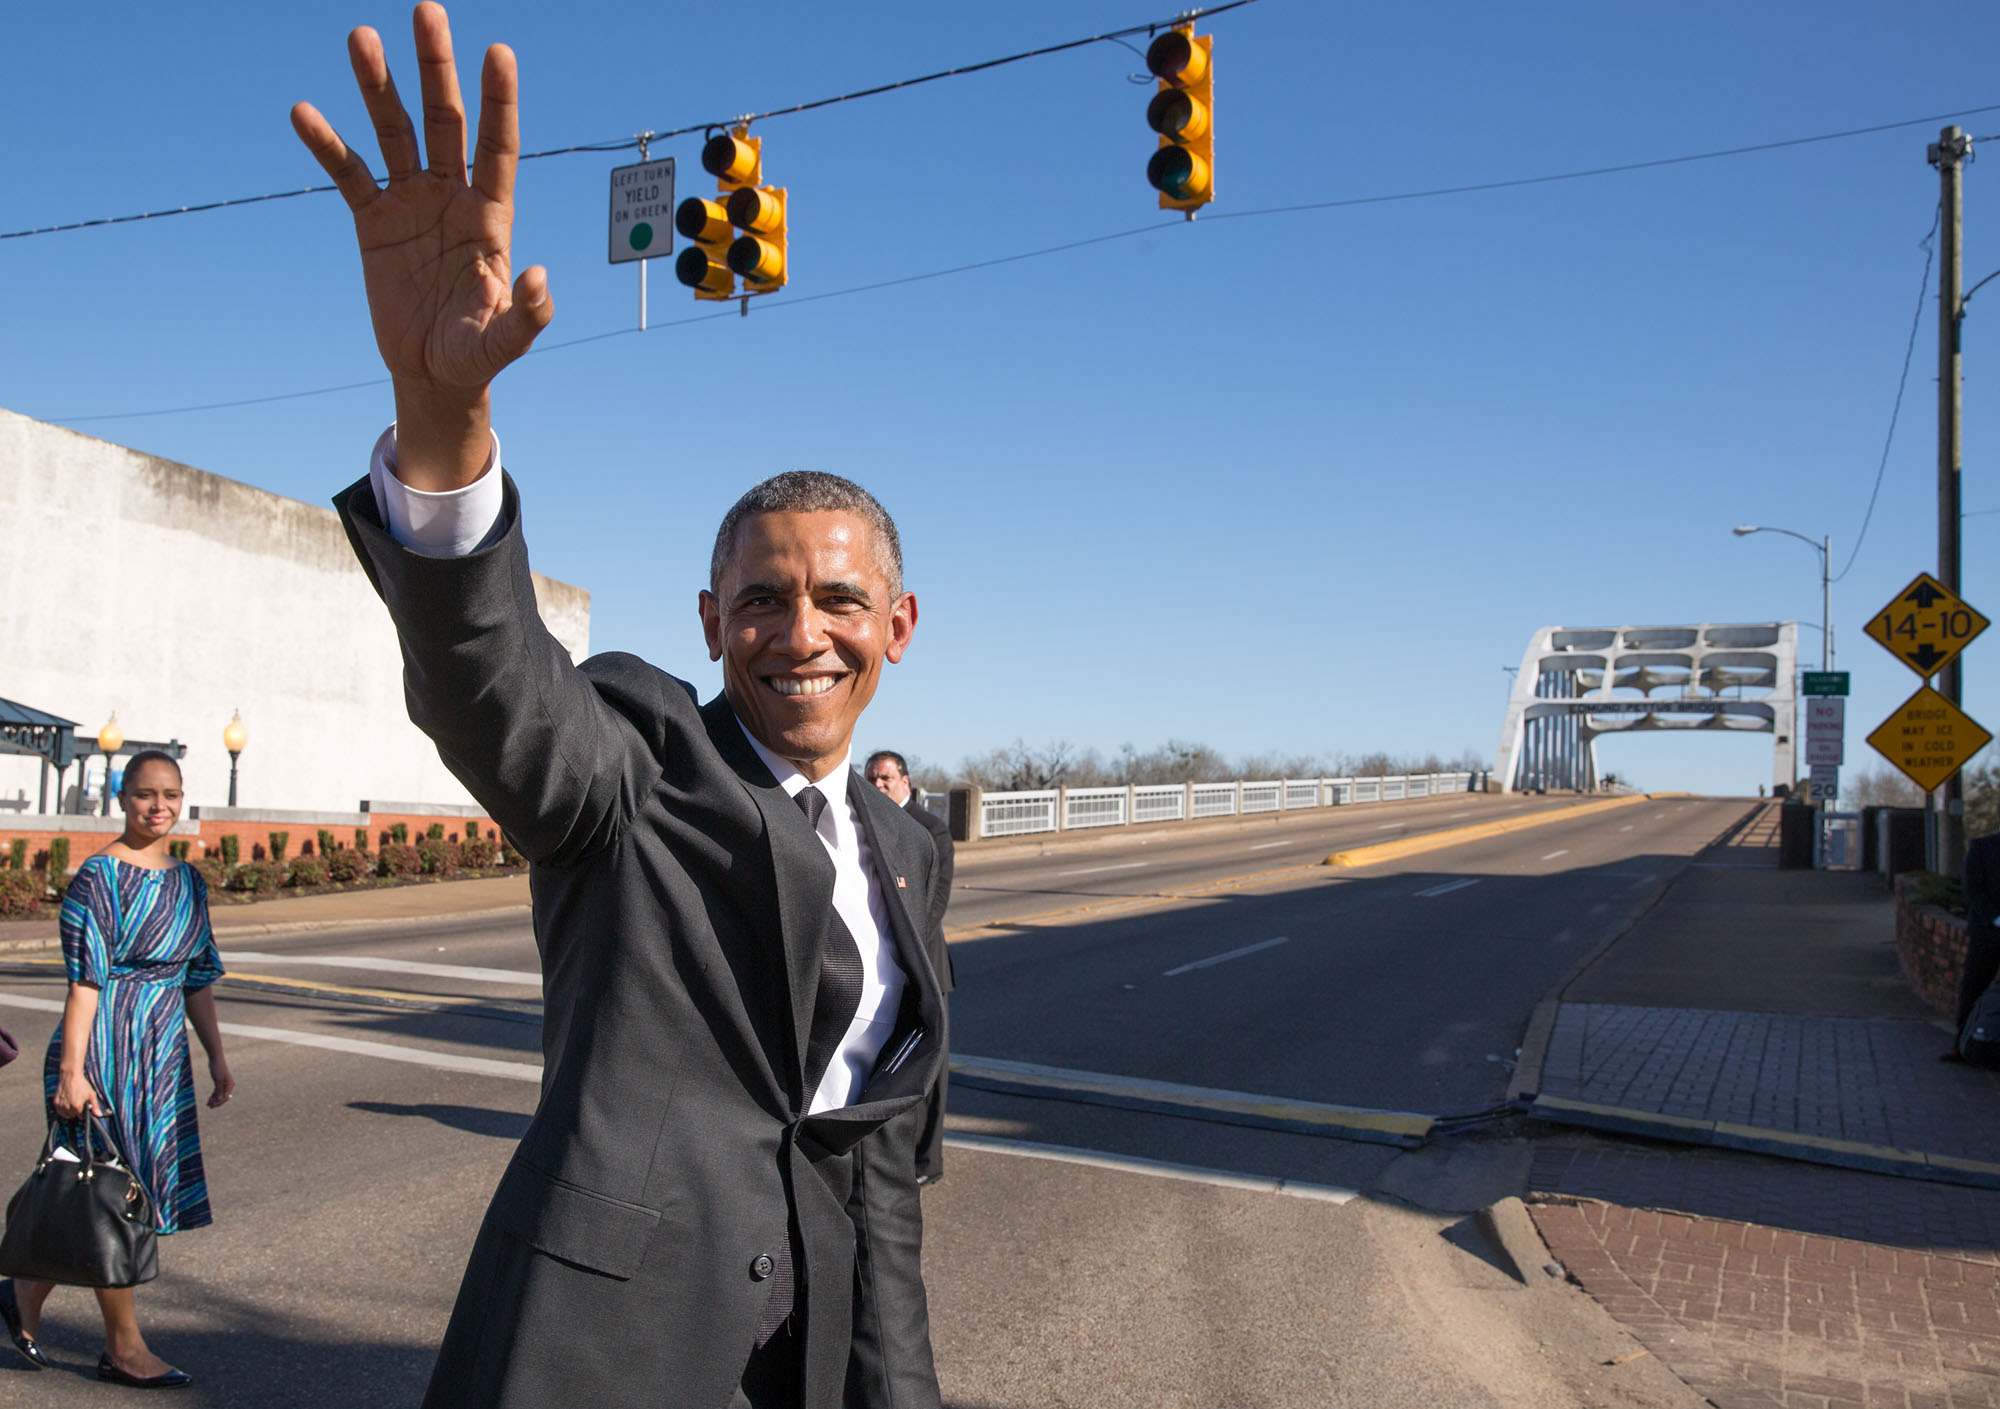 The President waves to the crowd. (Official White House Photo by Pete Souza)